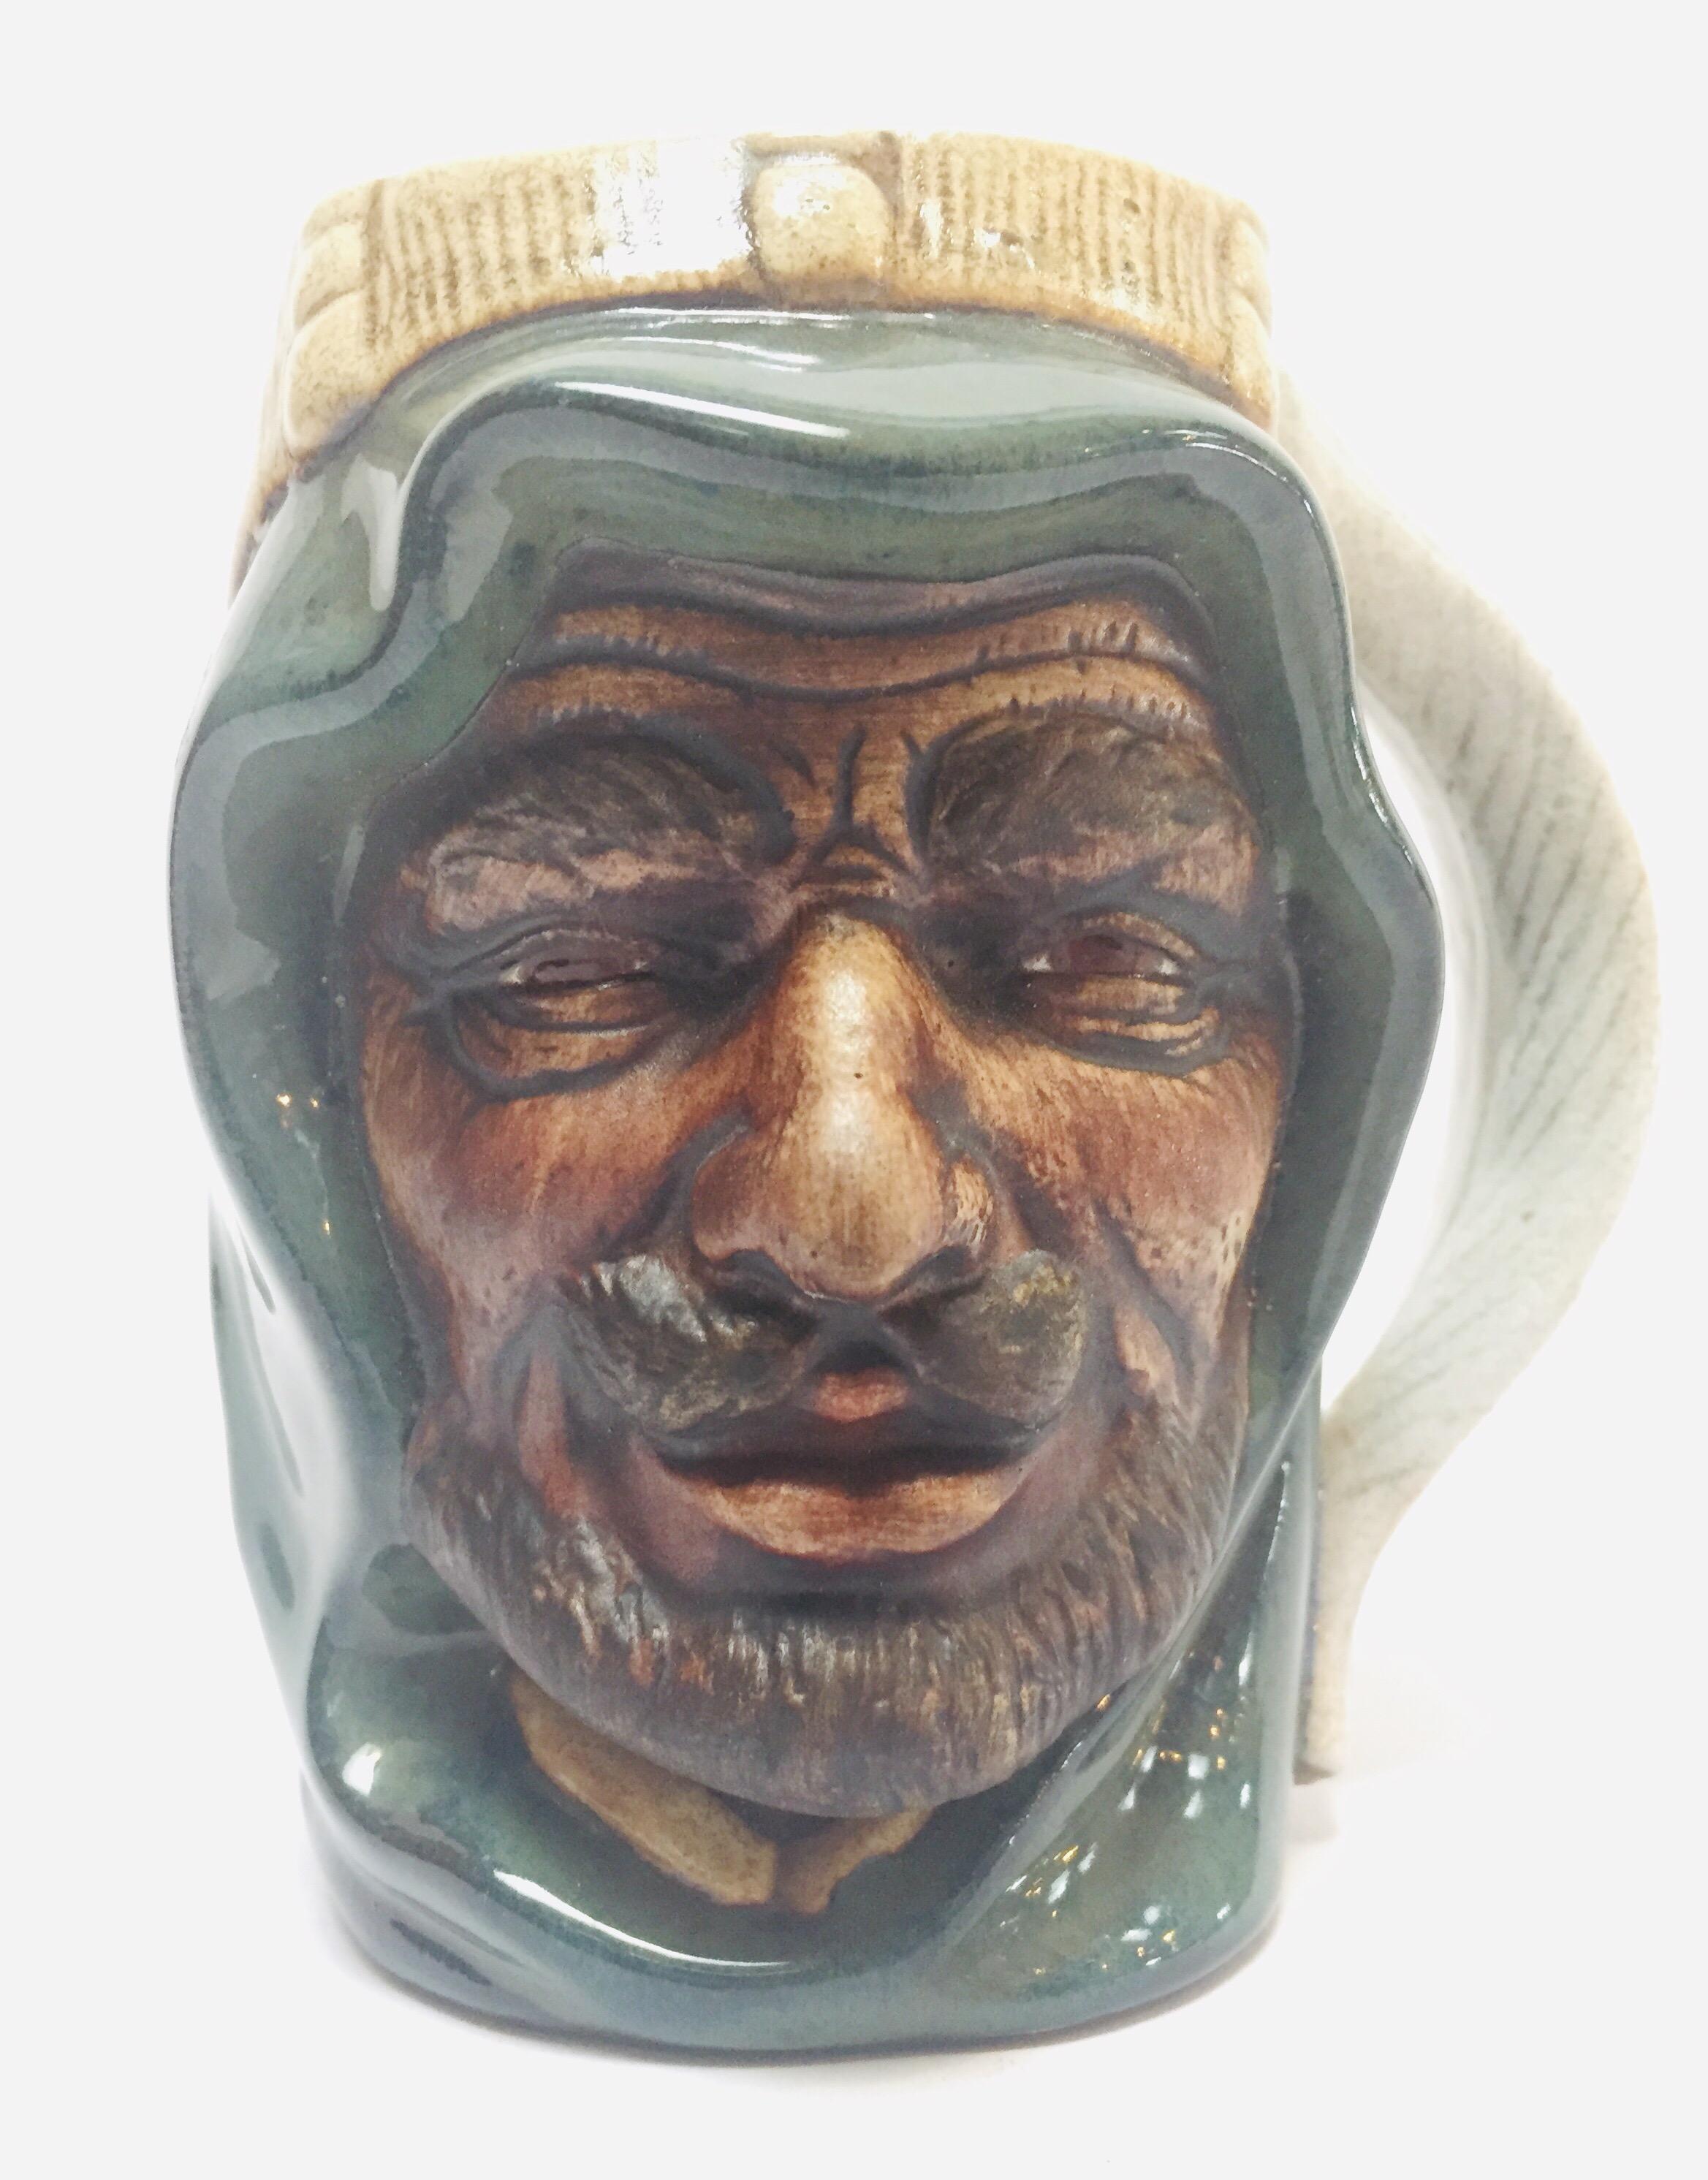 Vintage molded ceramic Middle Eastern Moorish Arab man character Toby mug.
Hand painted molded glazed ceramic cup shaped like the head of a bearded Moorish man with dark skin wearing keffiyeh (headdress) with a feather-shaped handle on one side.